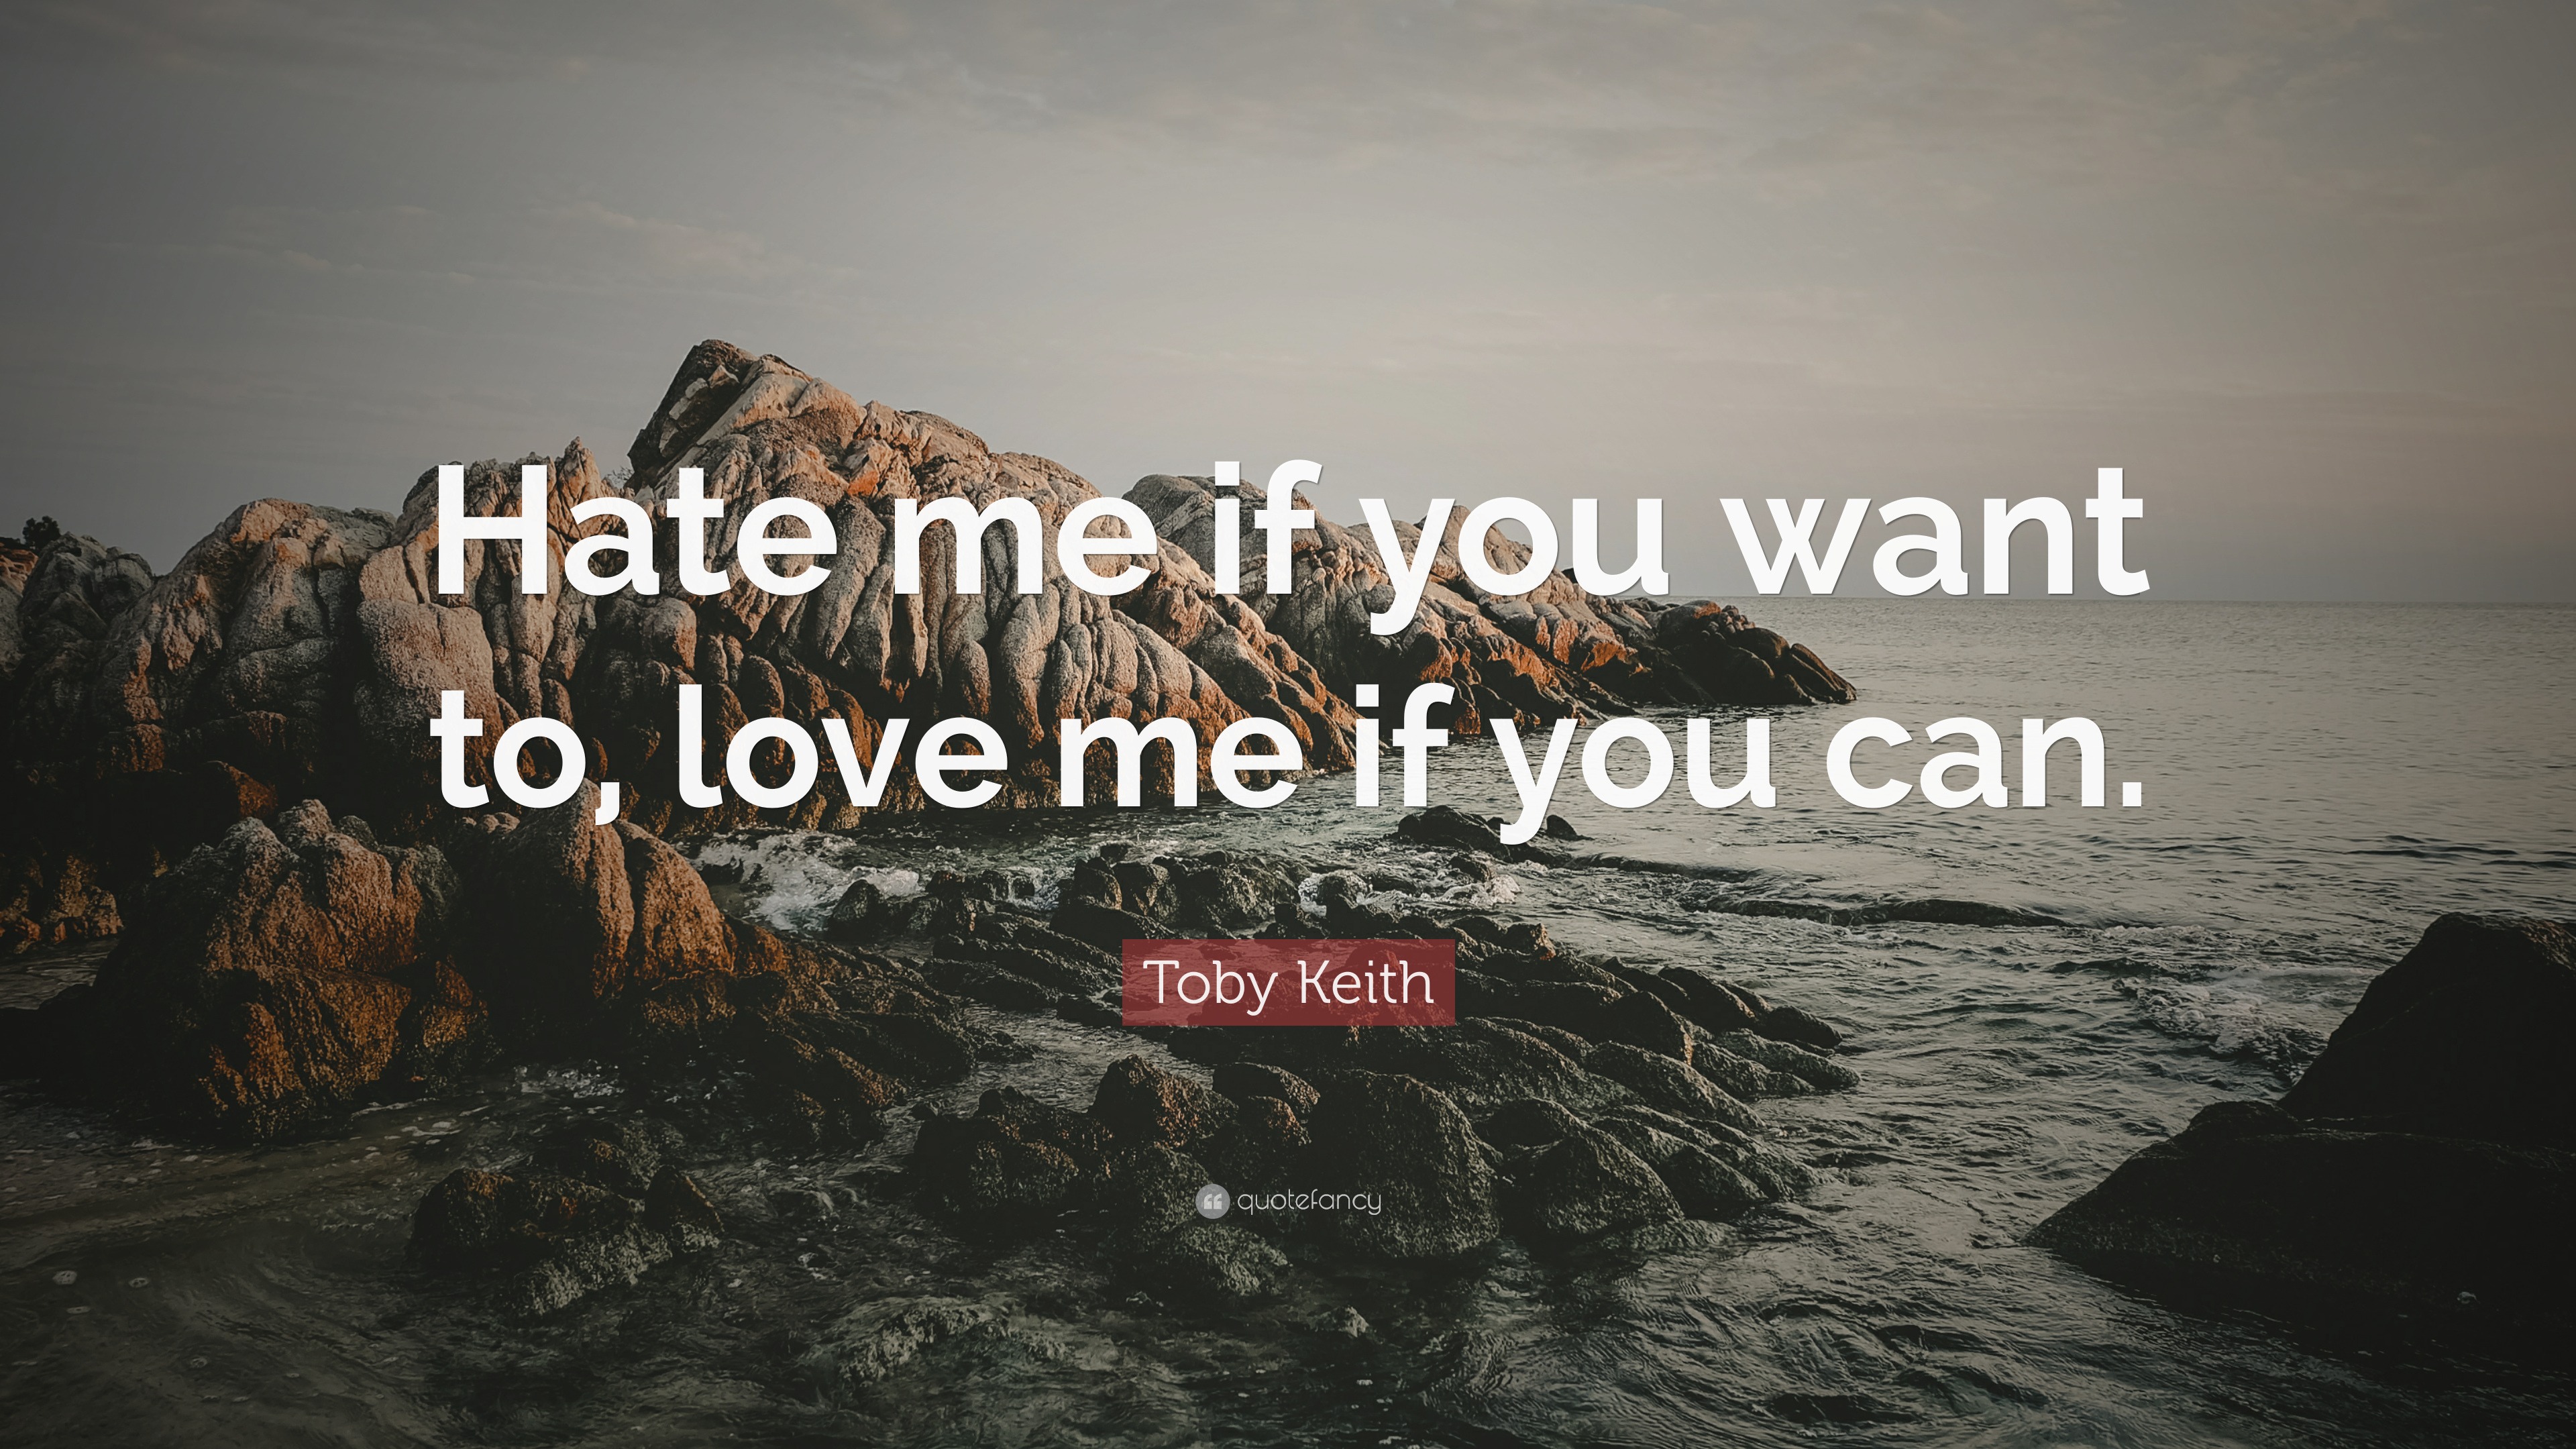 Toby Keith Quote: “Hate me if you want to, love me if you can.”